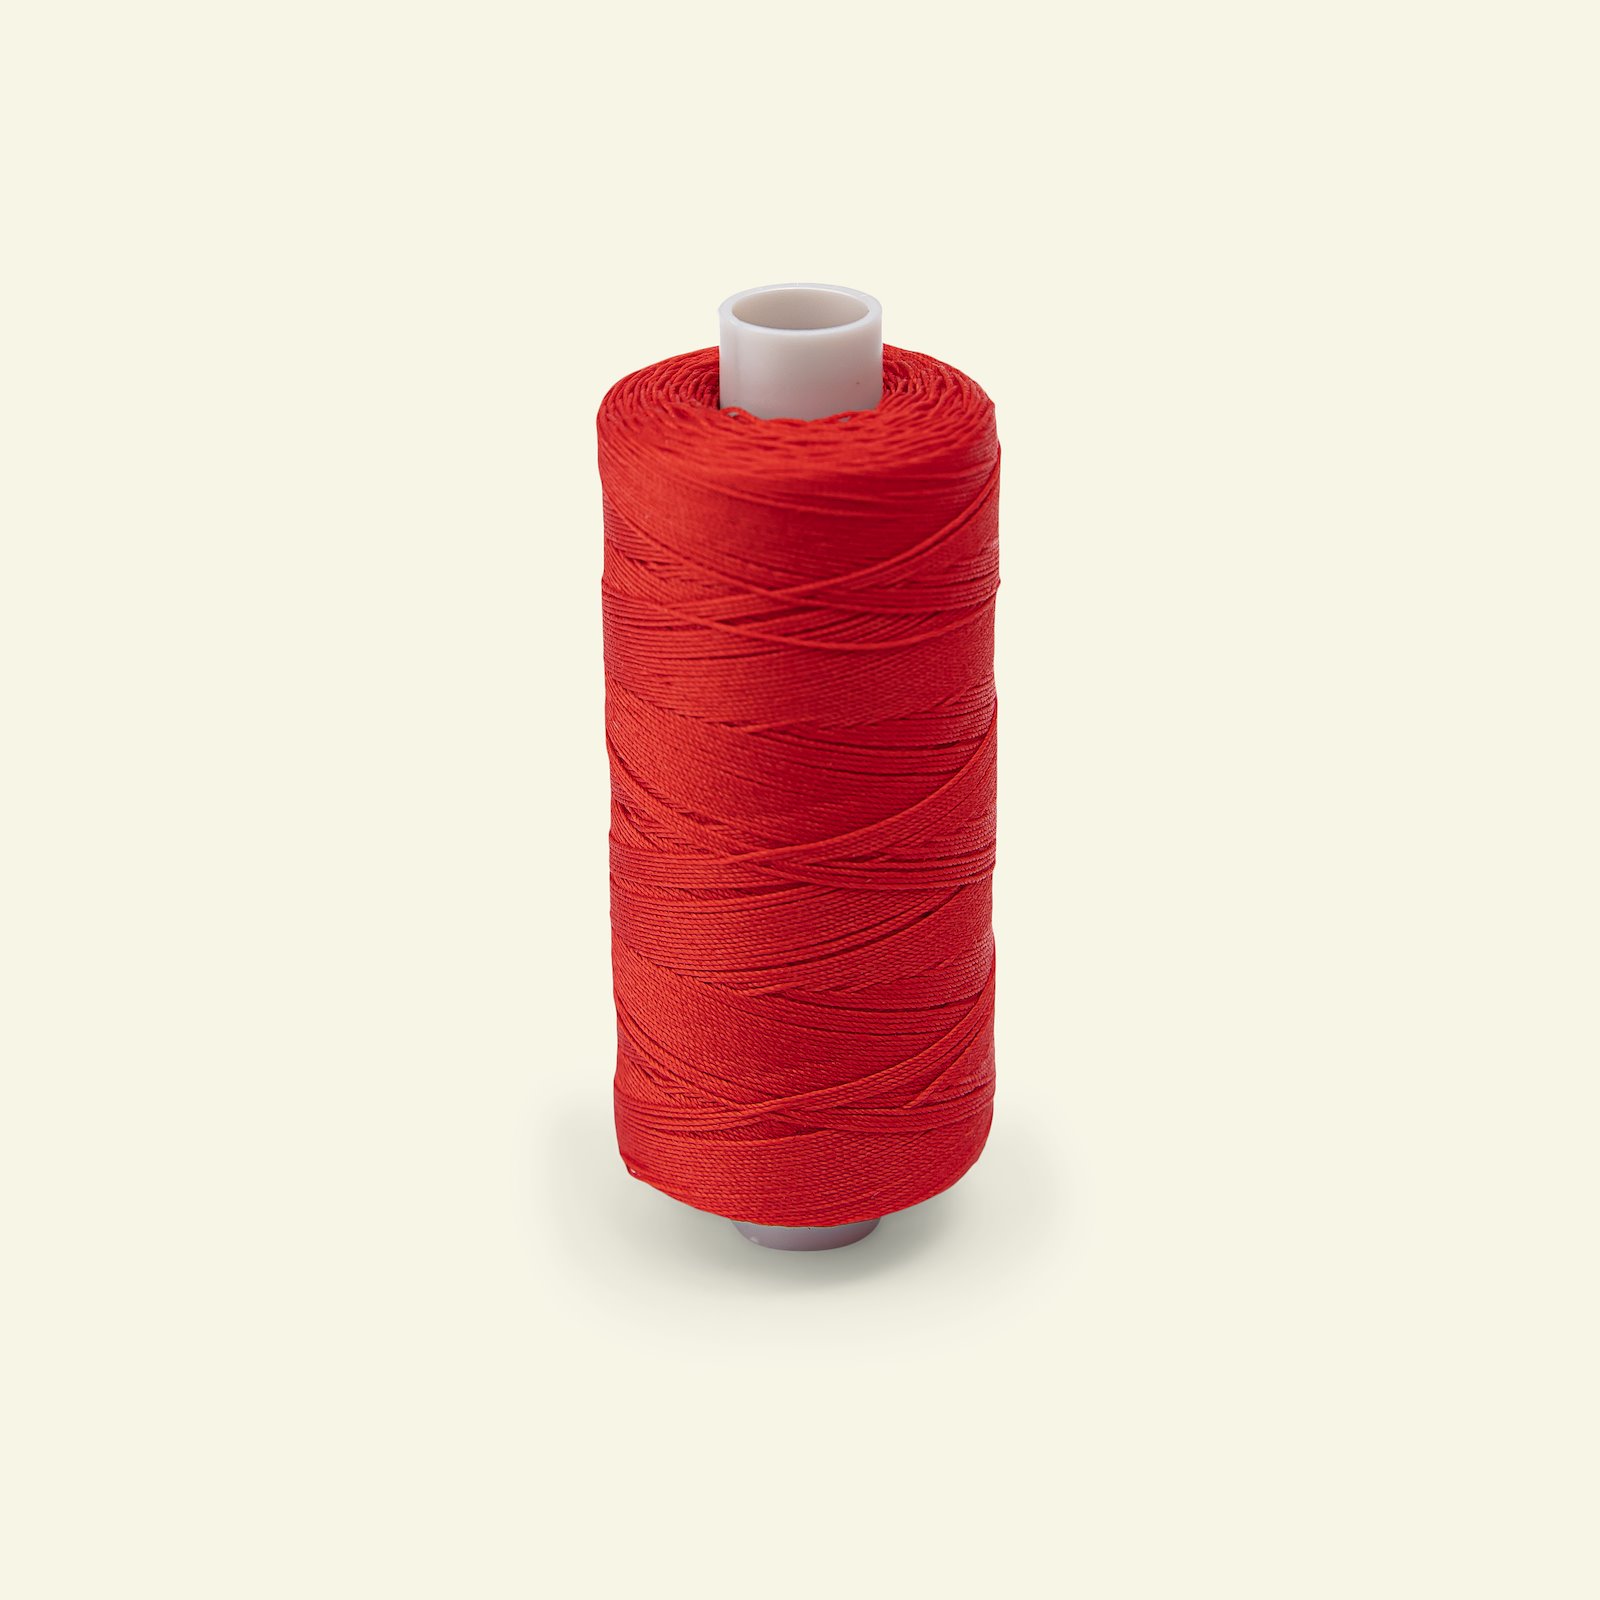 Upholstery thread red 300m 16011_pack